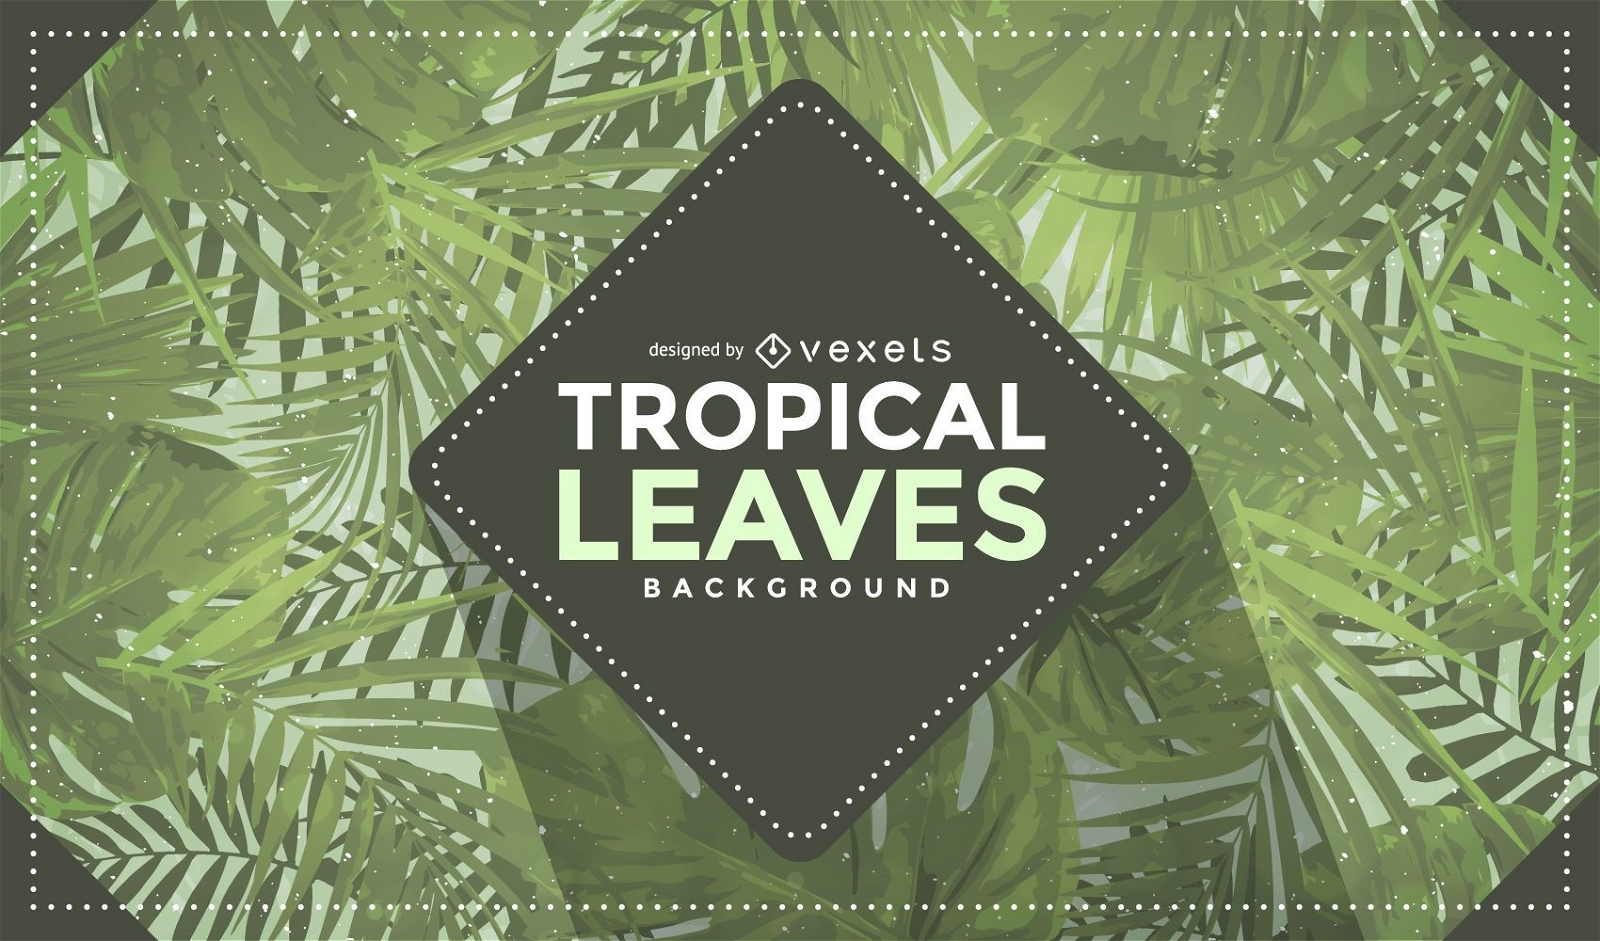 Tropical leaves background with badge